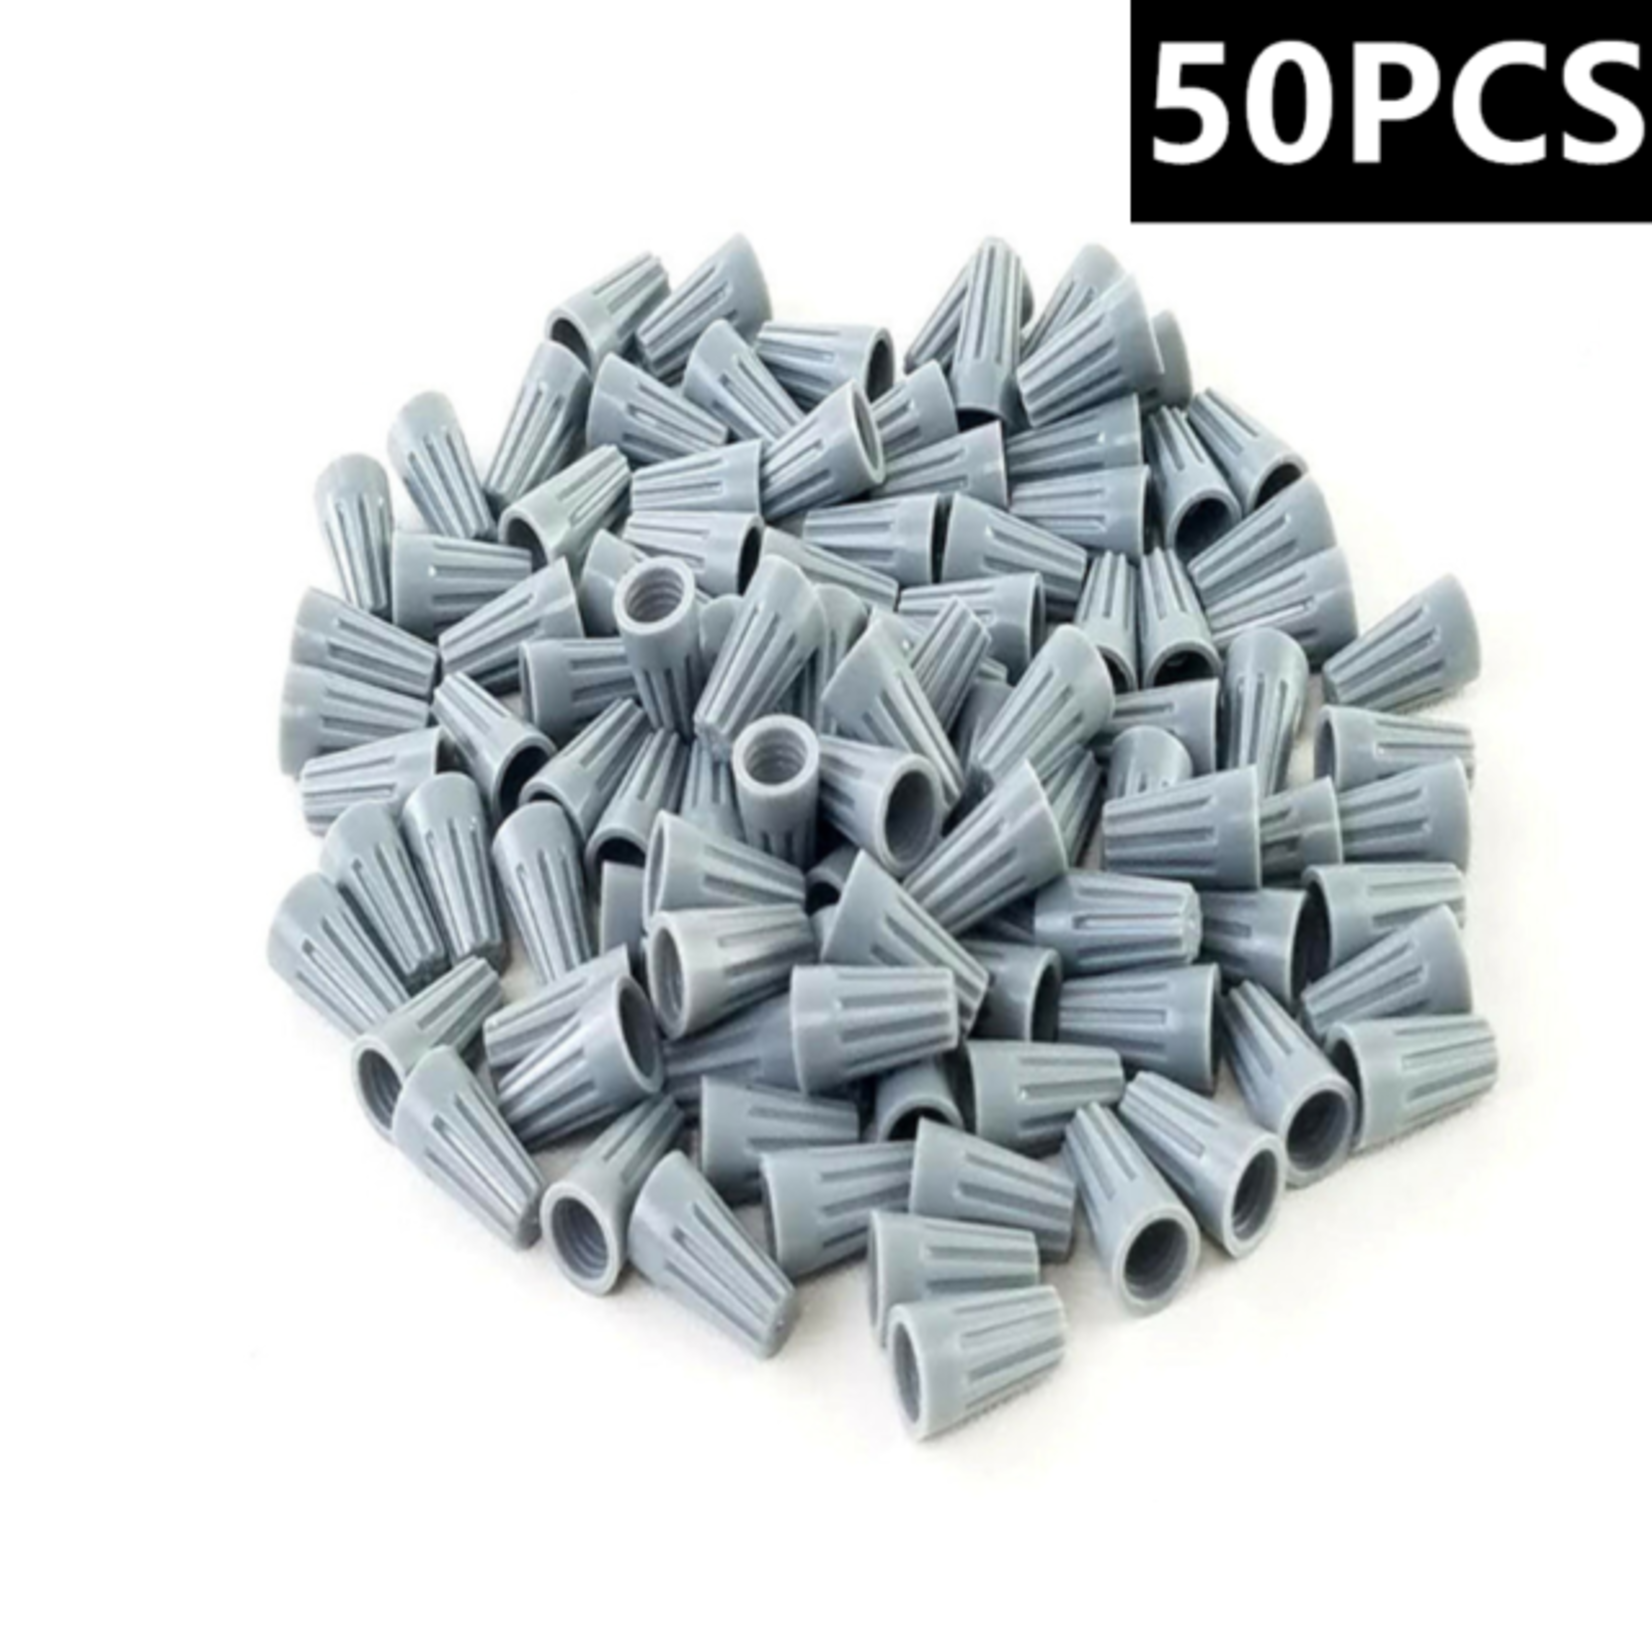 Generic Central Vacuum Grey Wire Twist Nuts (14-22AWG) - pkg. of 50